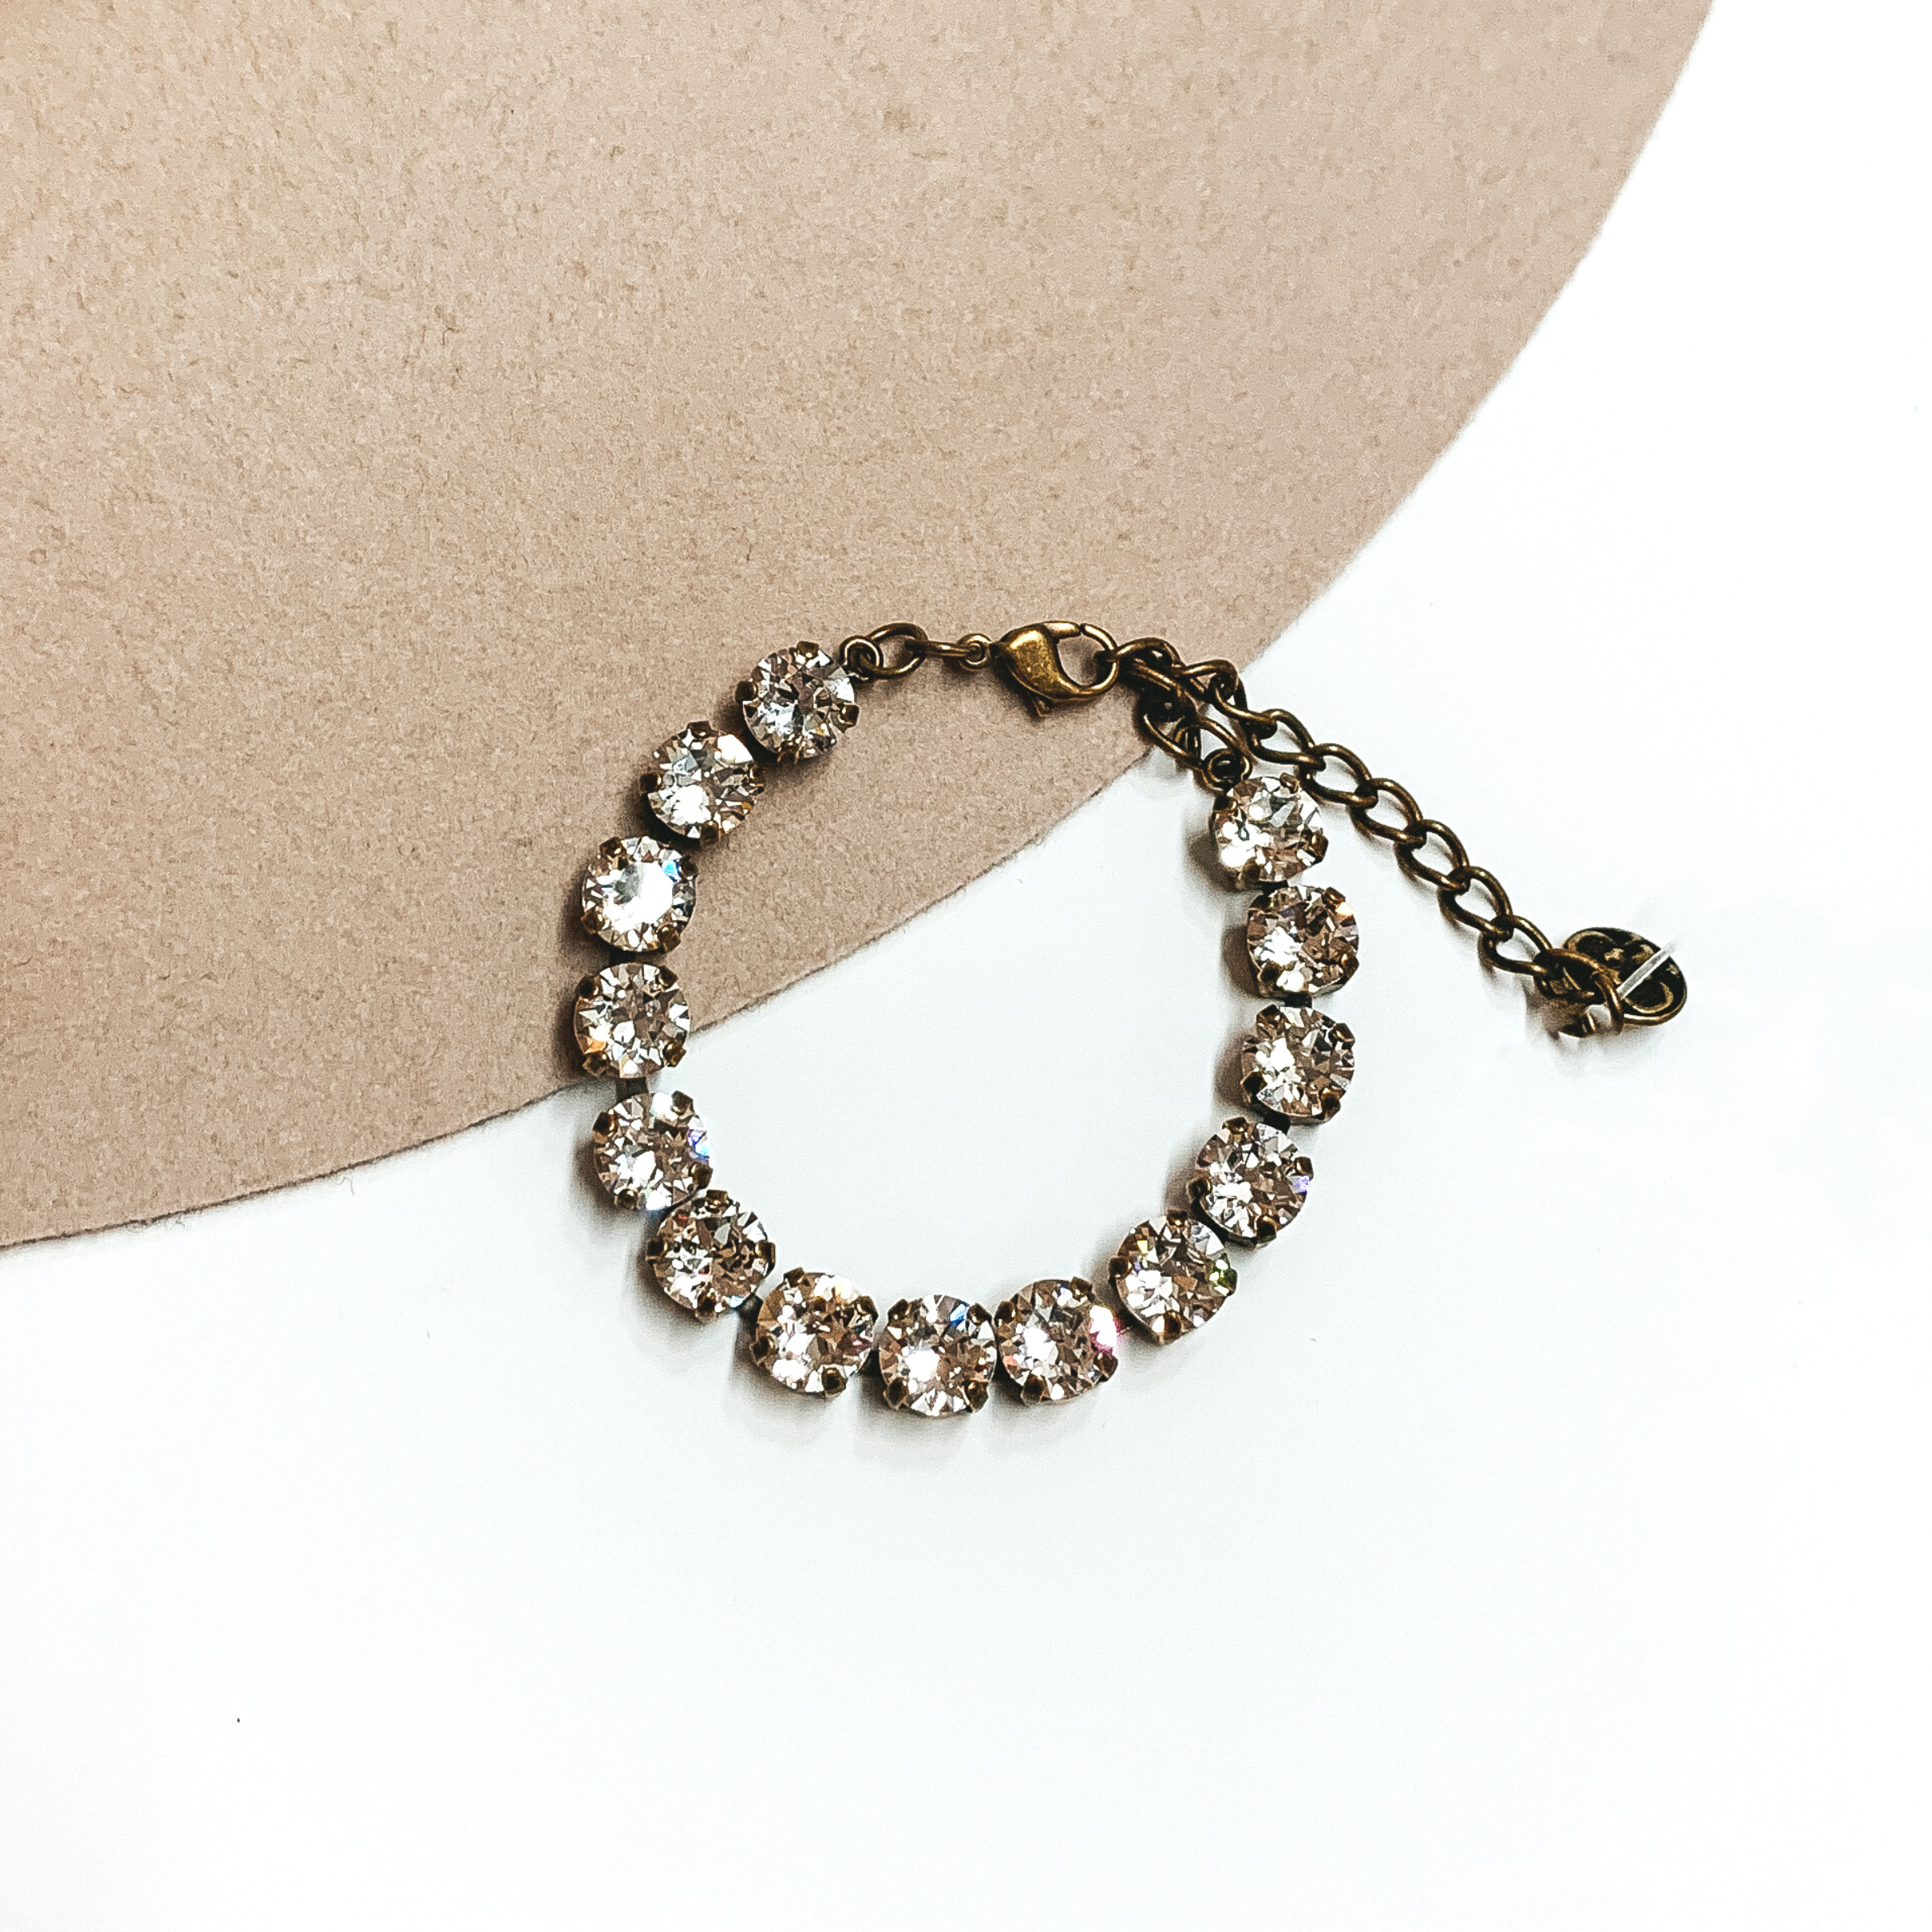 Circle, clear crystal bracelet with a bronze backing. This bracelet is pictured on a white and tan background.